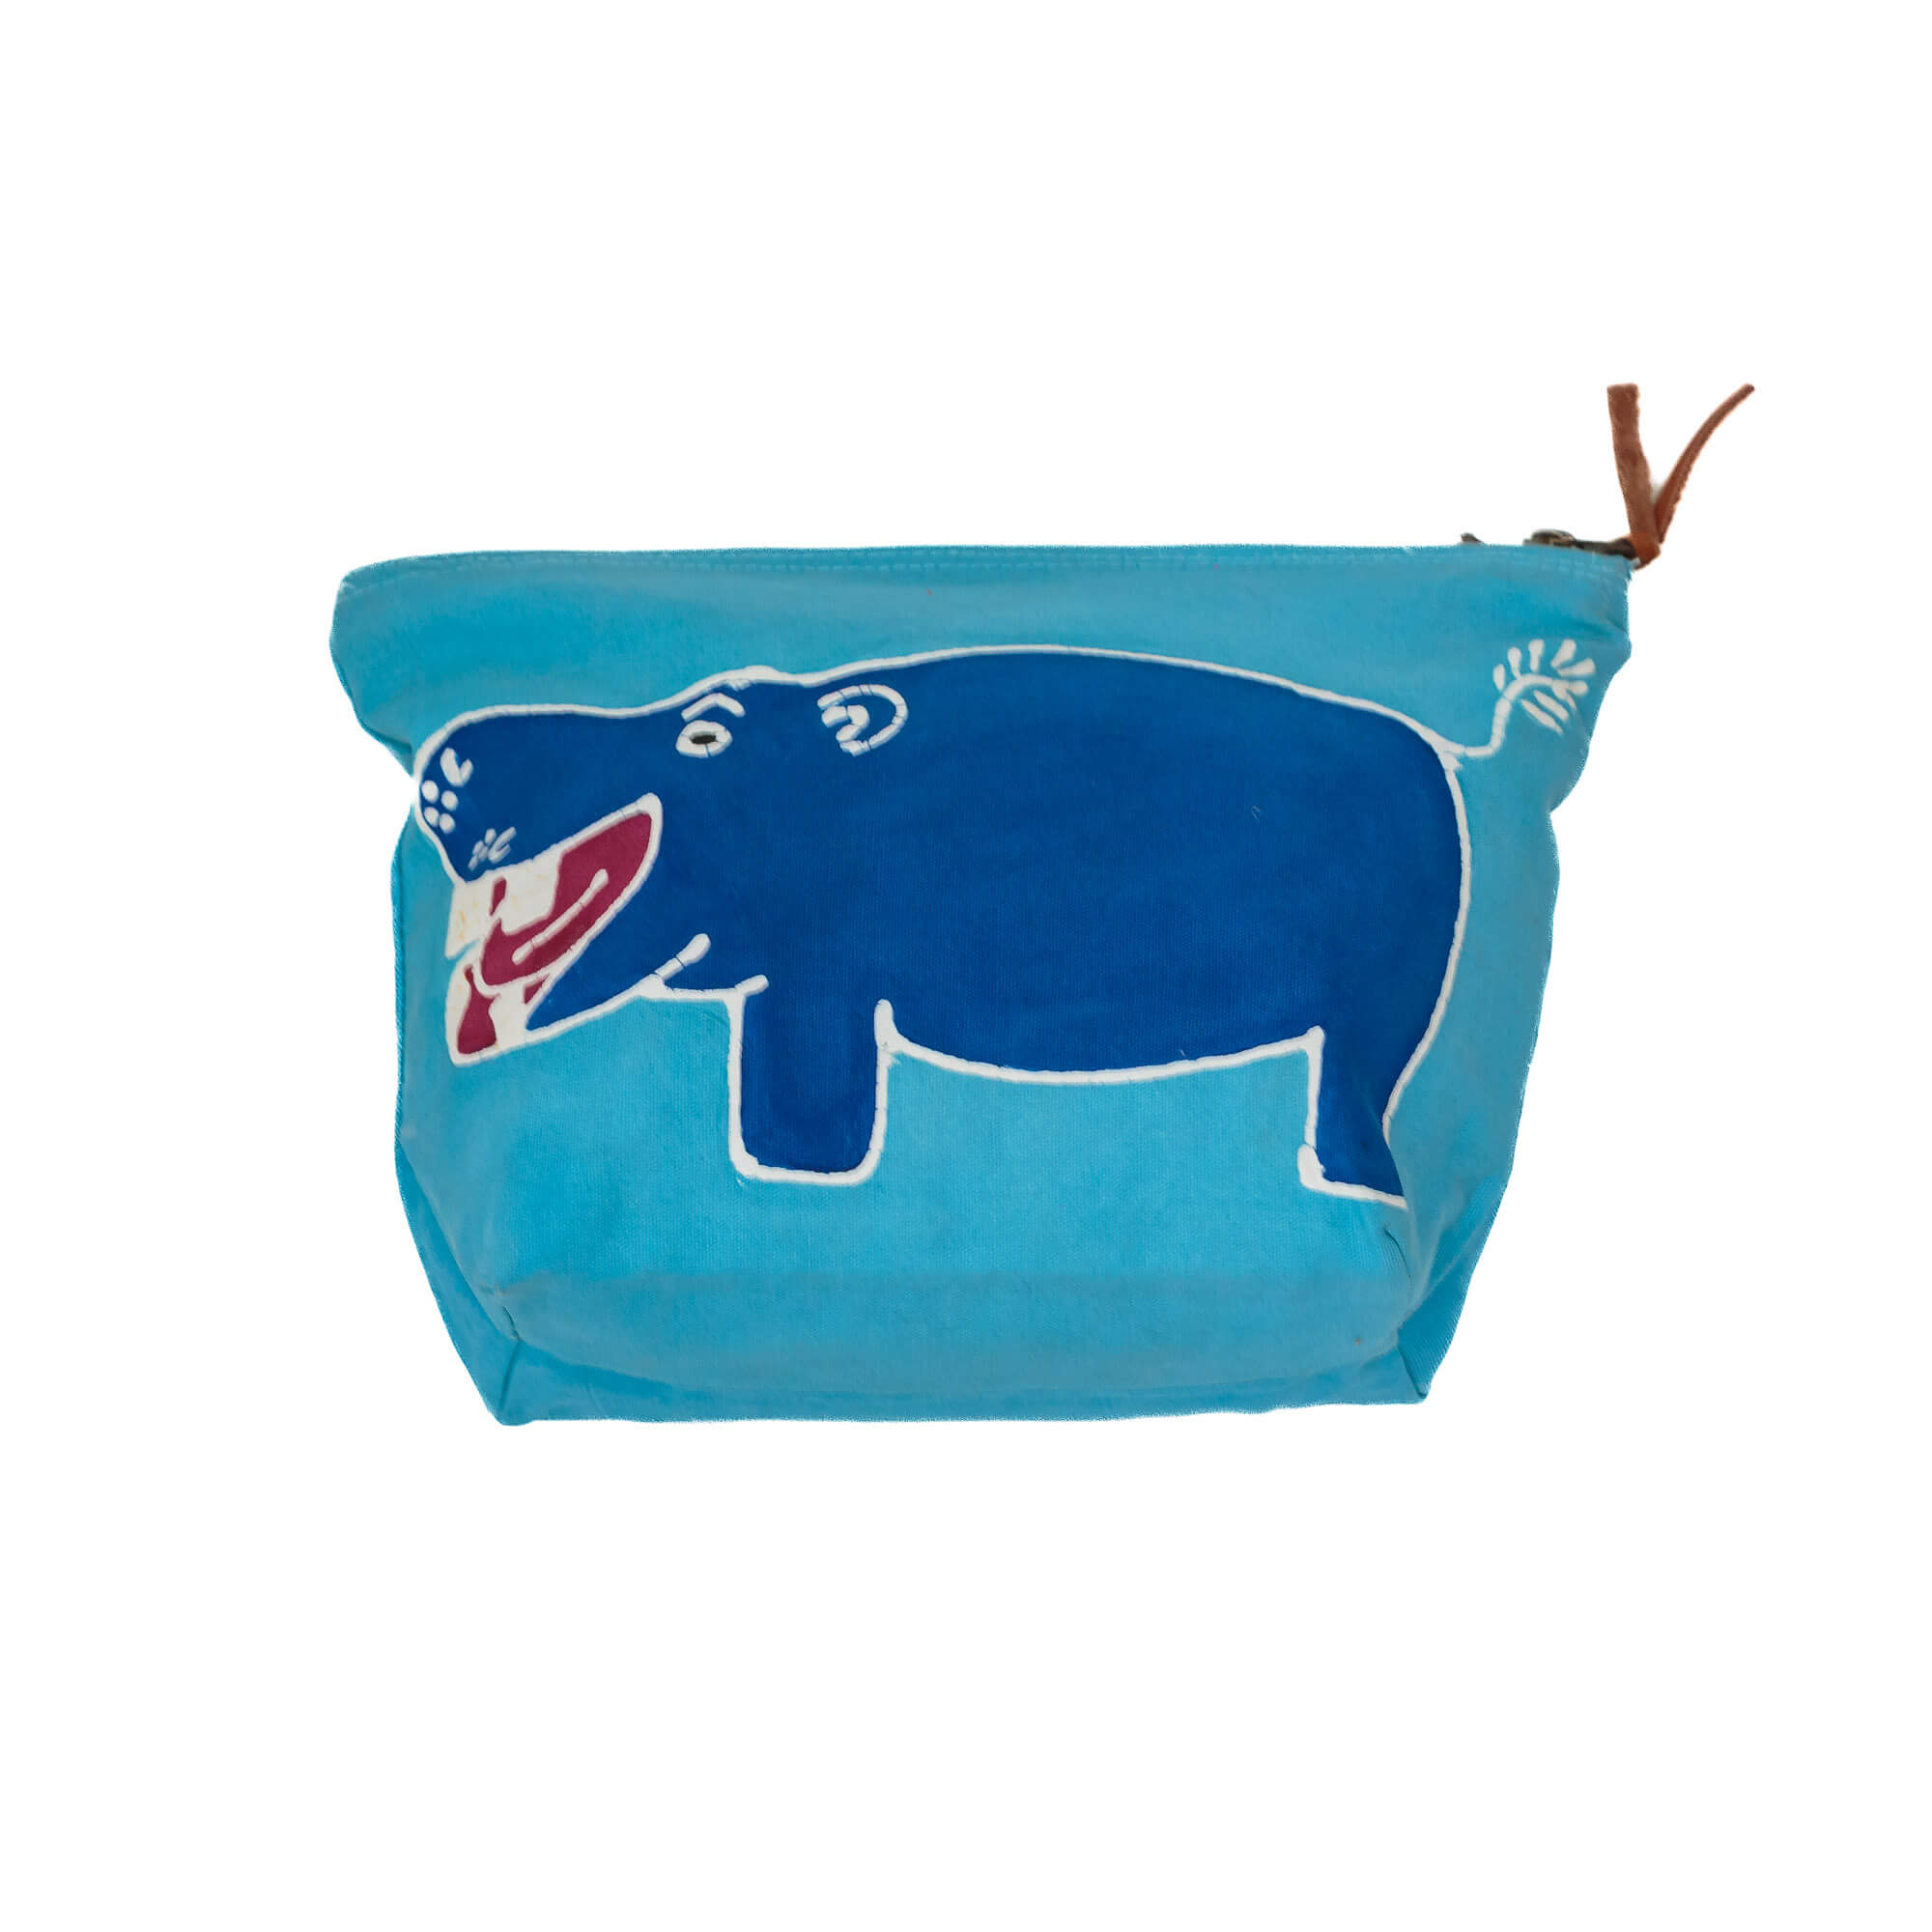 IMPERFECT SALE : Safari Fun Hippo Wash Bag - Hand Painted by TRIBAL TEXTILES - Handcrafted Home Decor Interiors - African Made